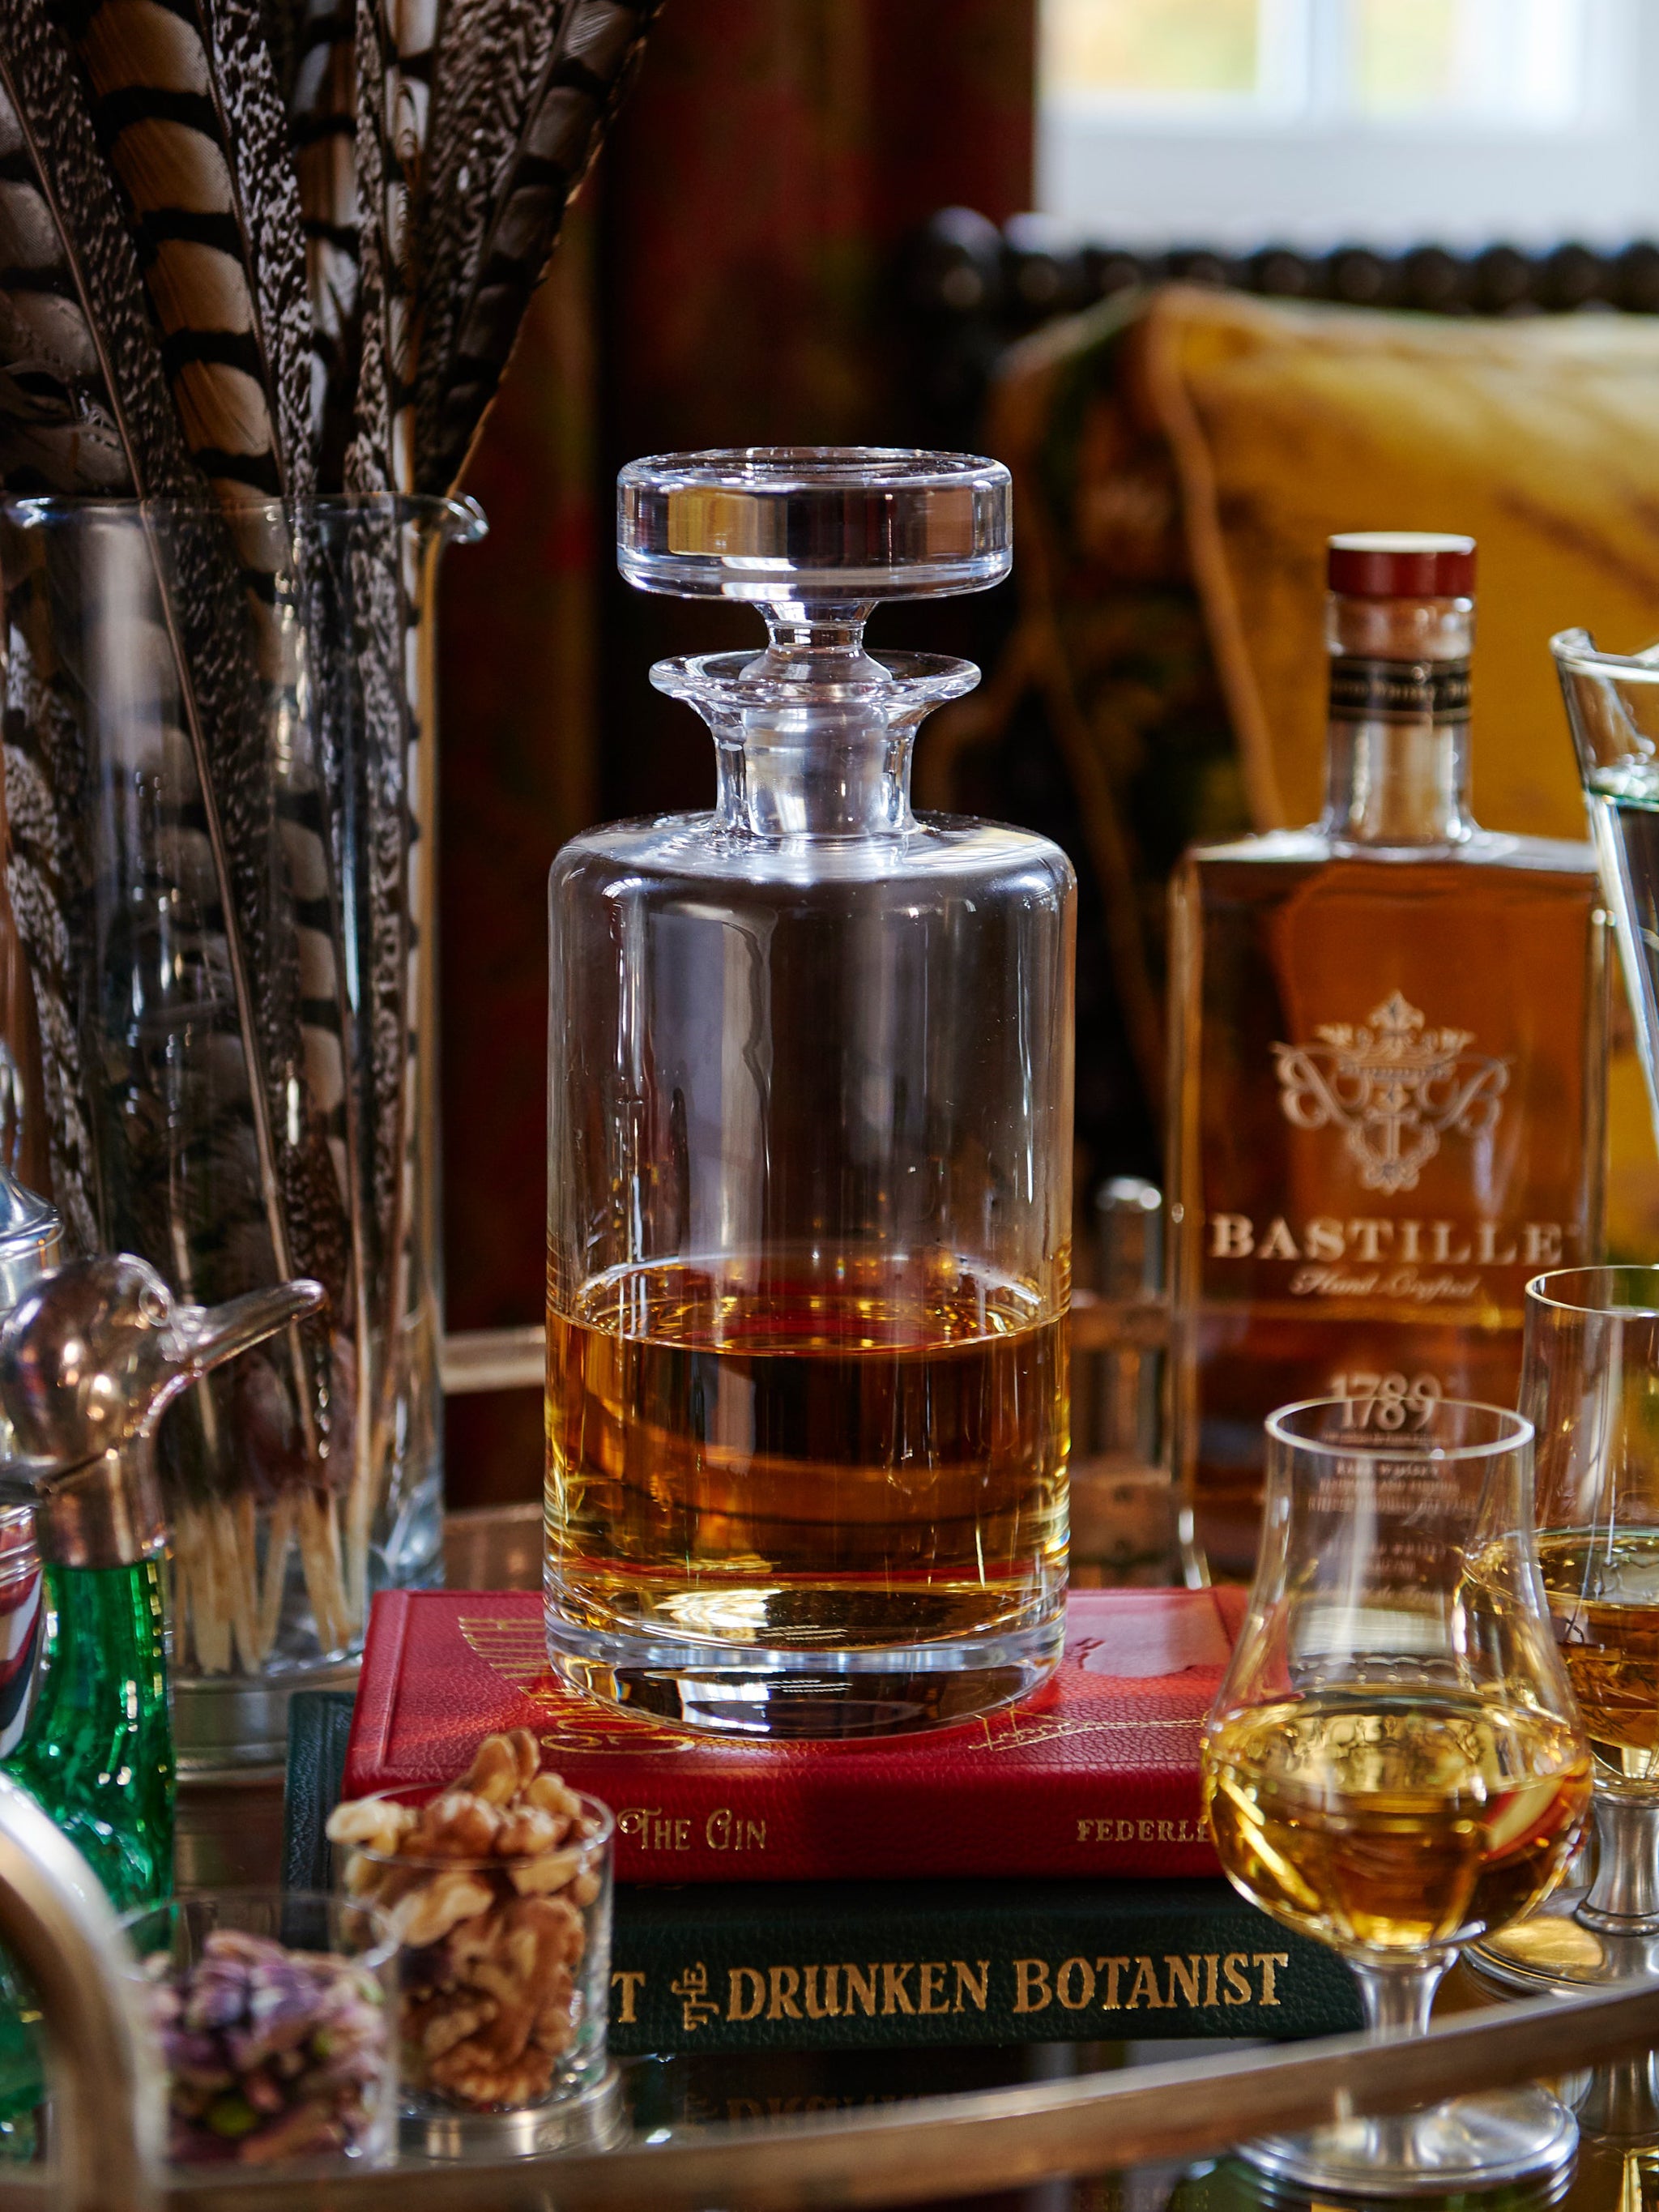 Carafes & Decanters - Search By Style - Crystal